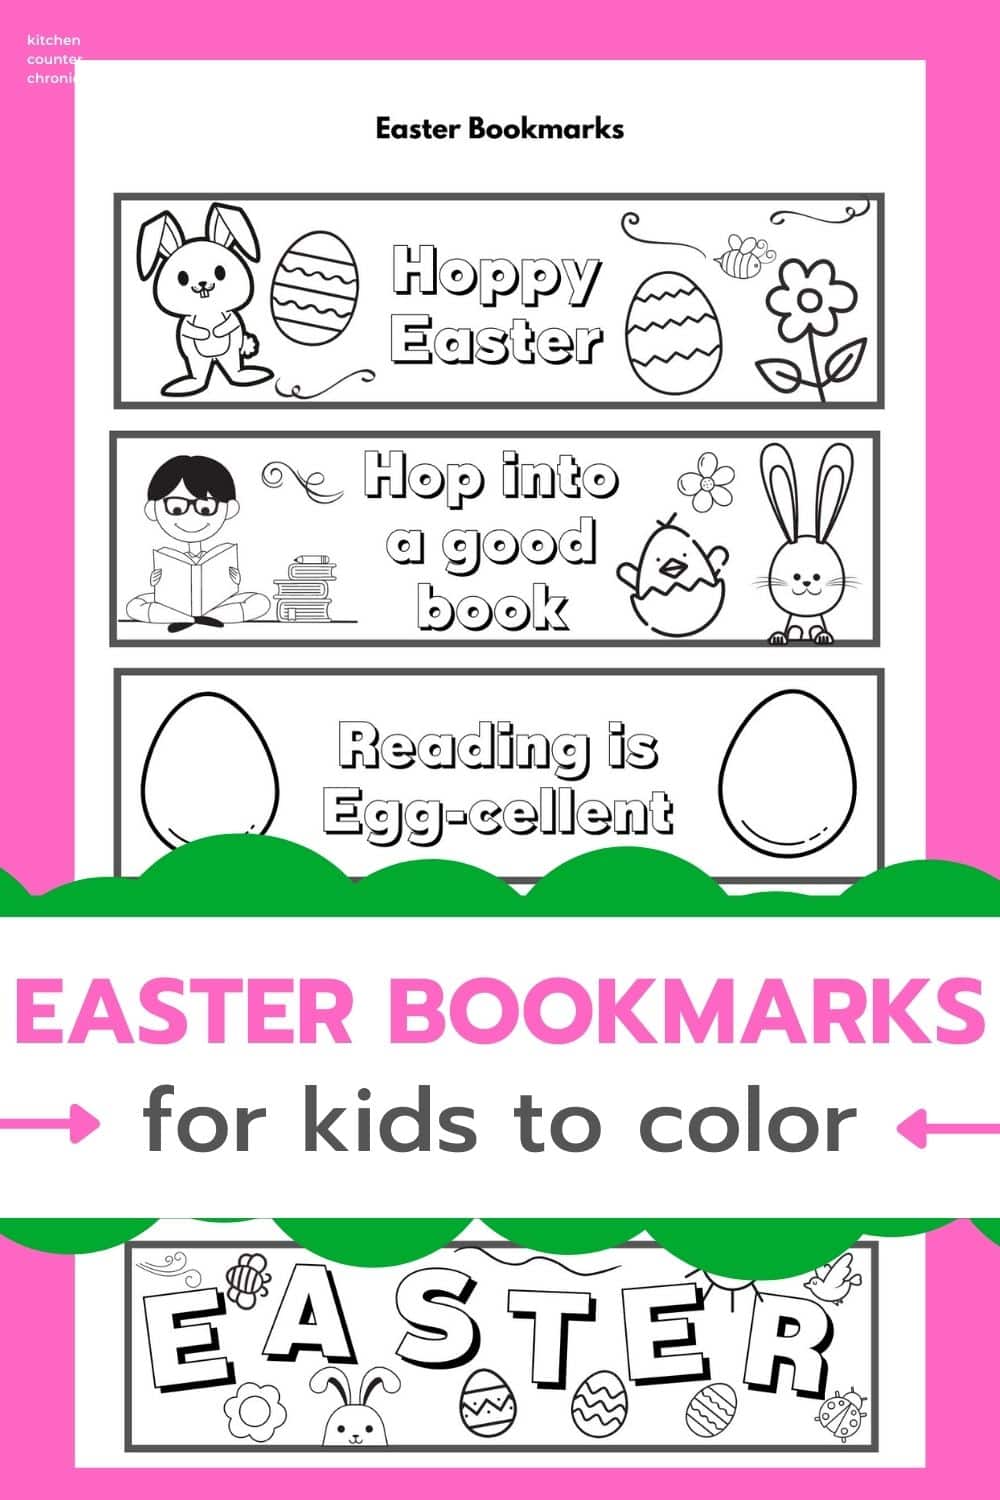 printable easter bookmarks to color for kids